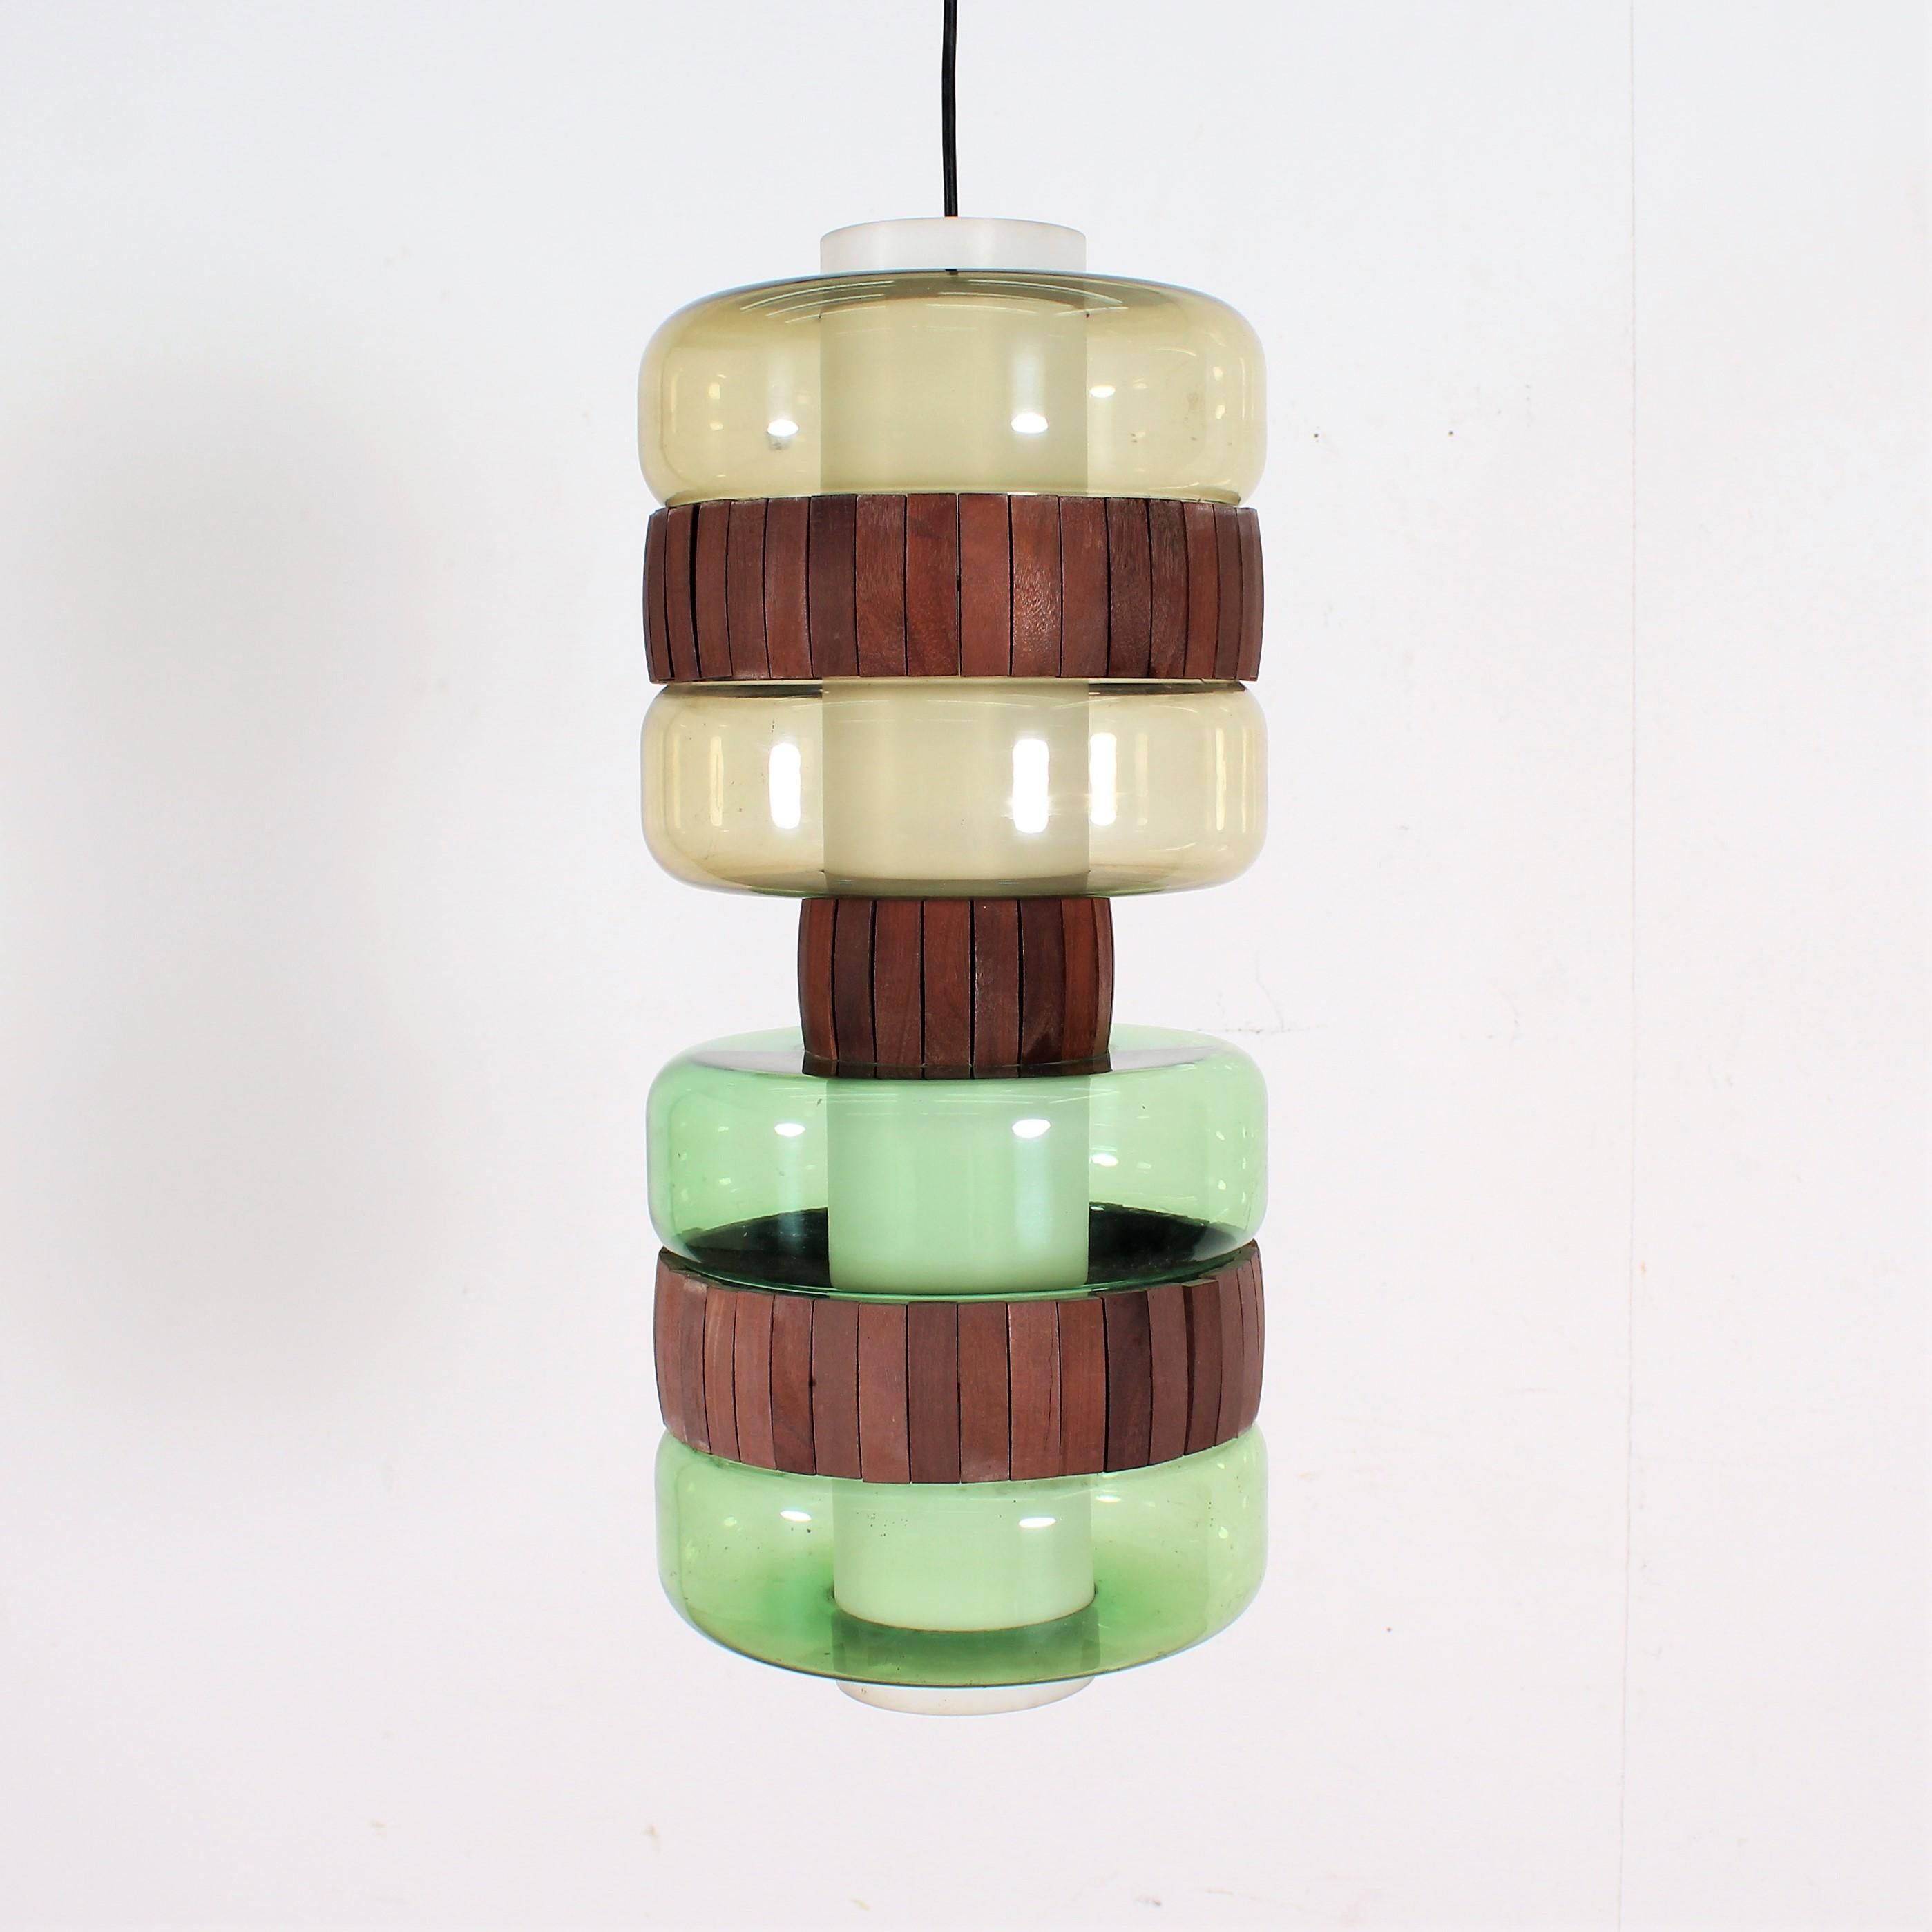 A wonderful polychrome pendant chandelier with total 2-light, in Perspex and light wood. Scandinavian production in 1960s. Original in each part.
Wear consistent with age and use.